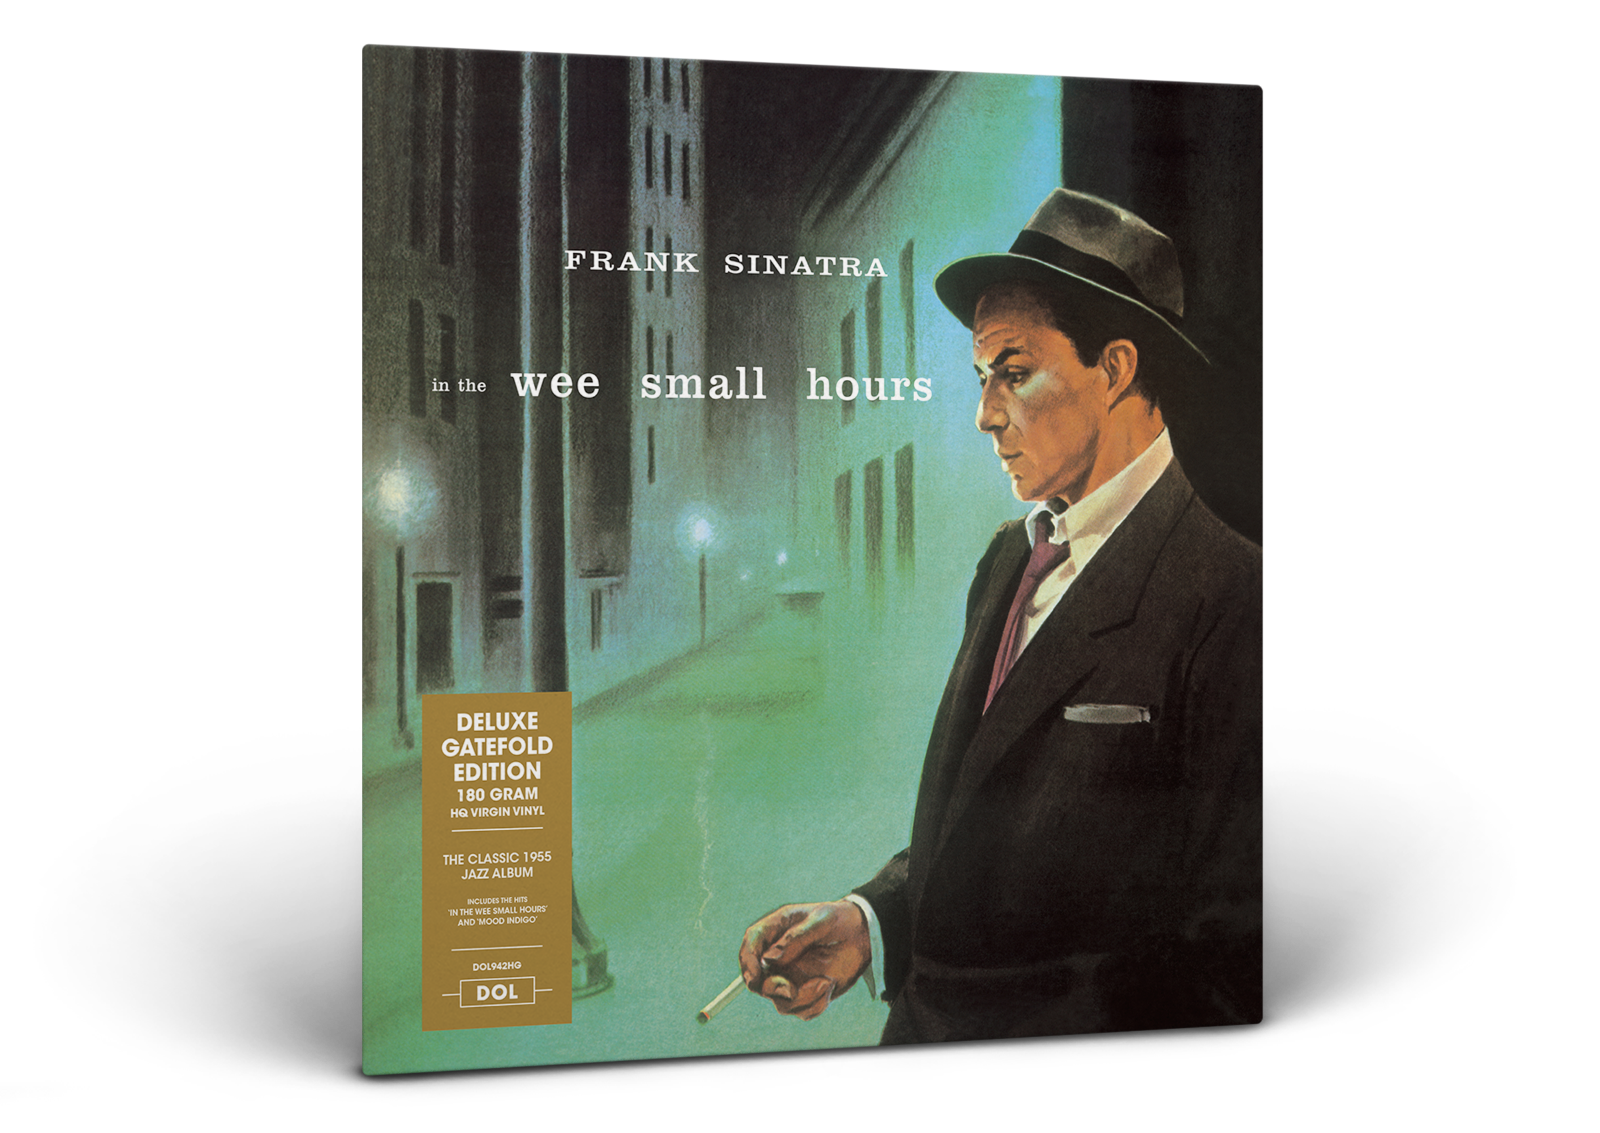 Small hours. Frank Sinatra - in the Wee small hours (1955). Фрэнк Синатра in the Wee small. Часы Фрэнк Синатра. Фрэнк Синатра дуэты.